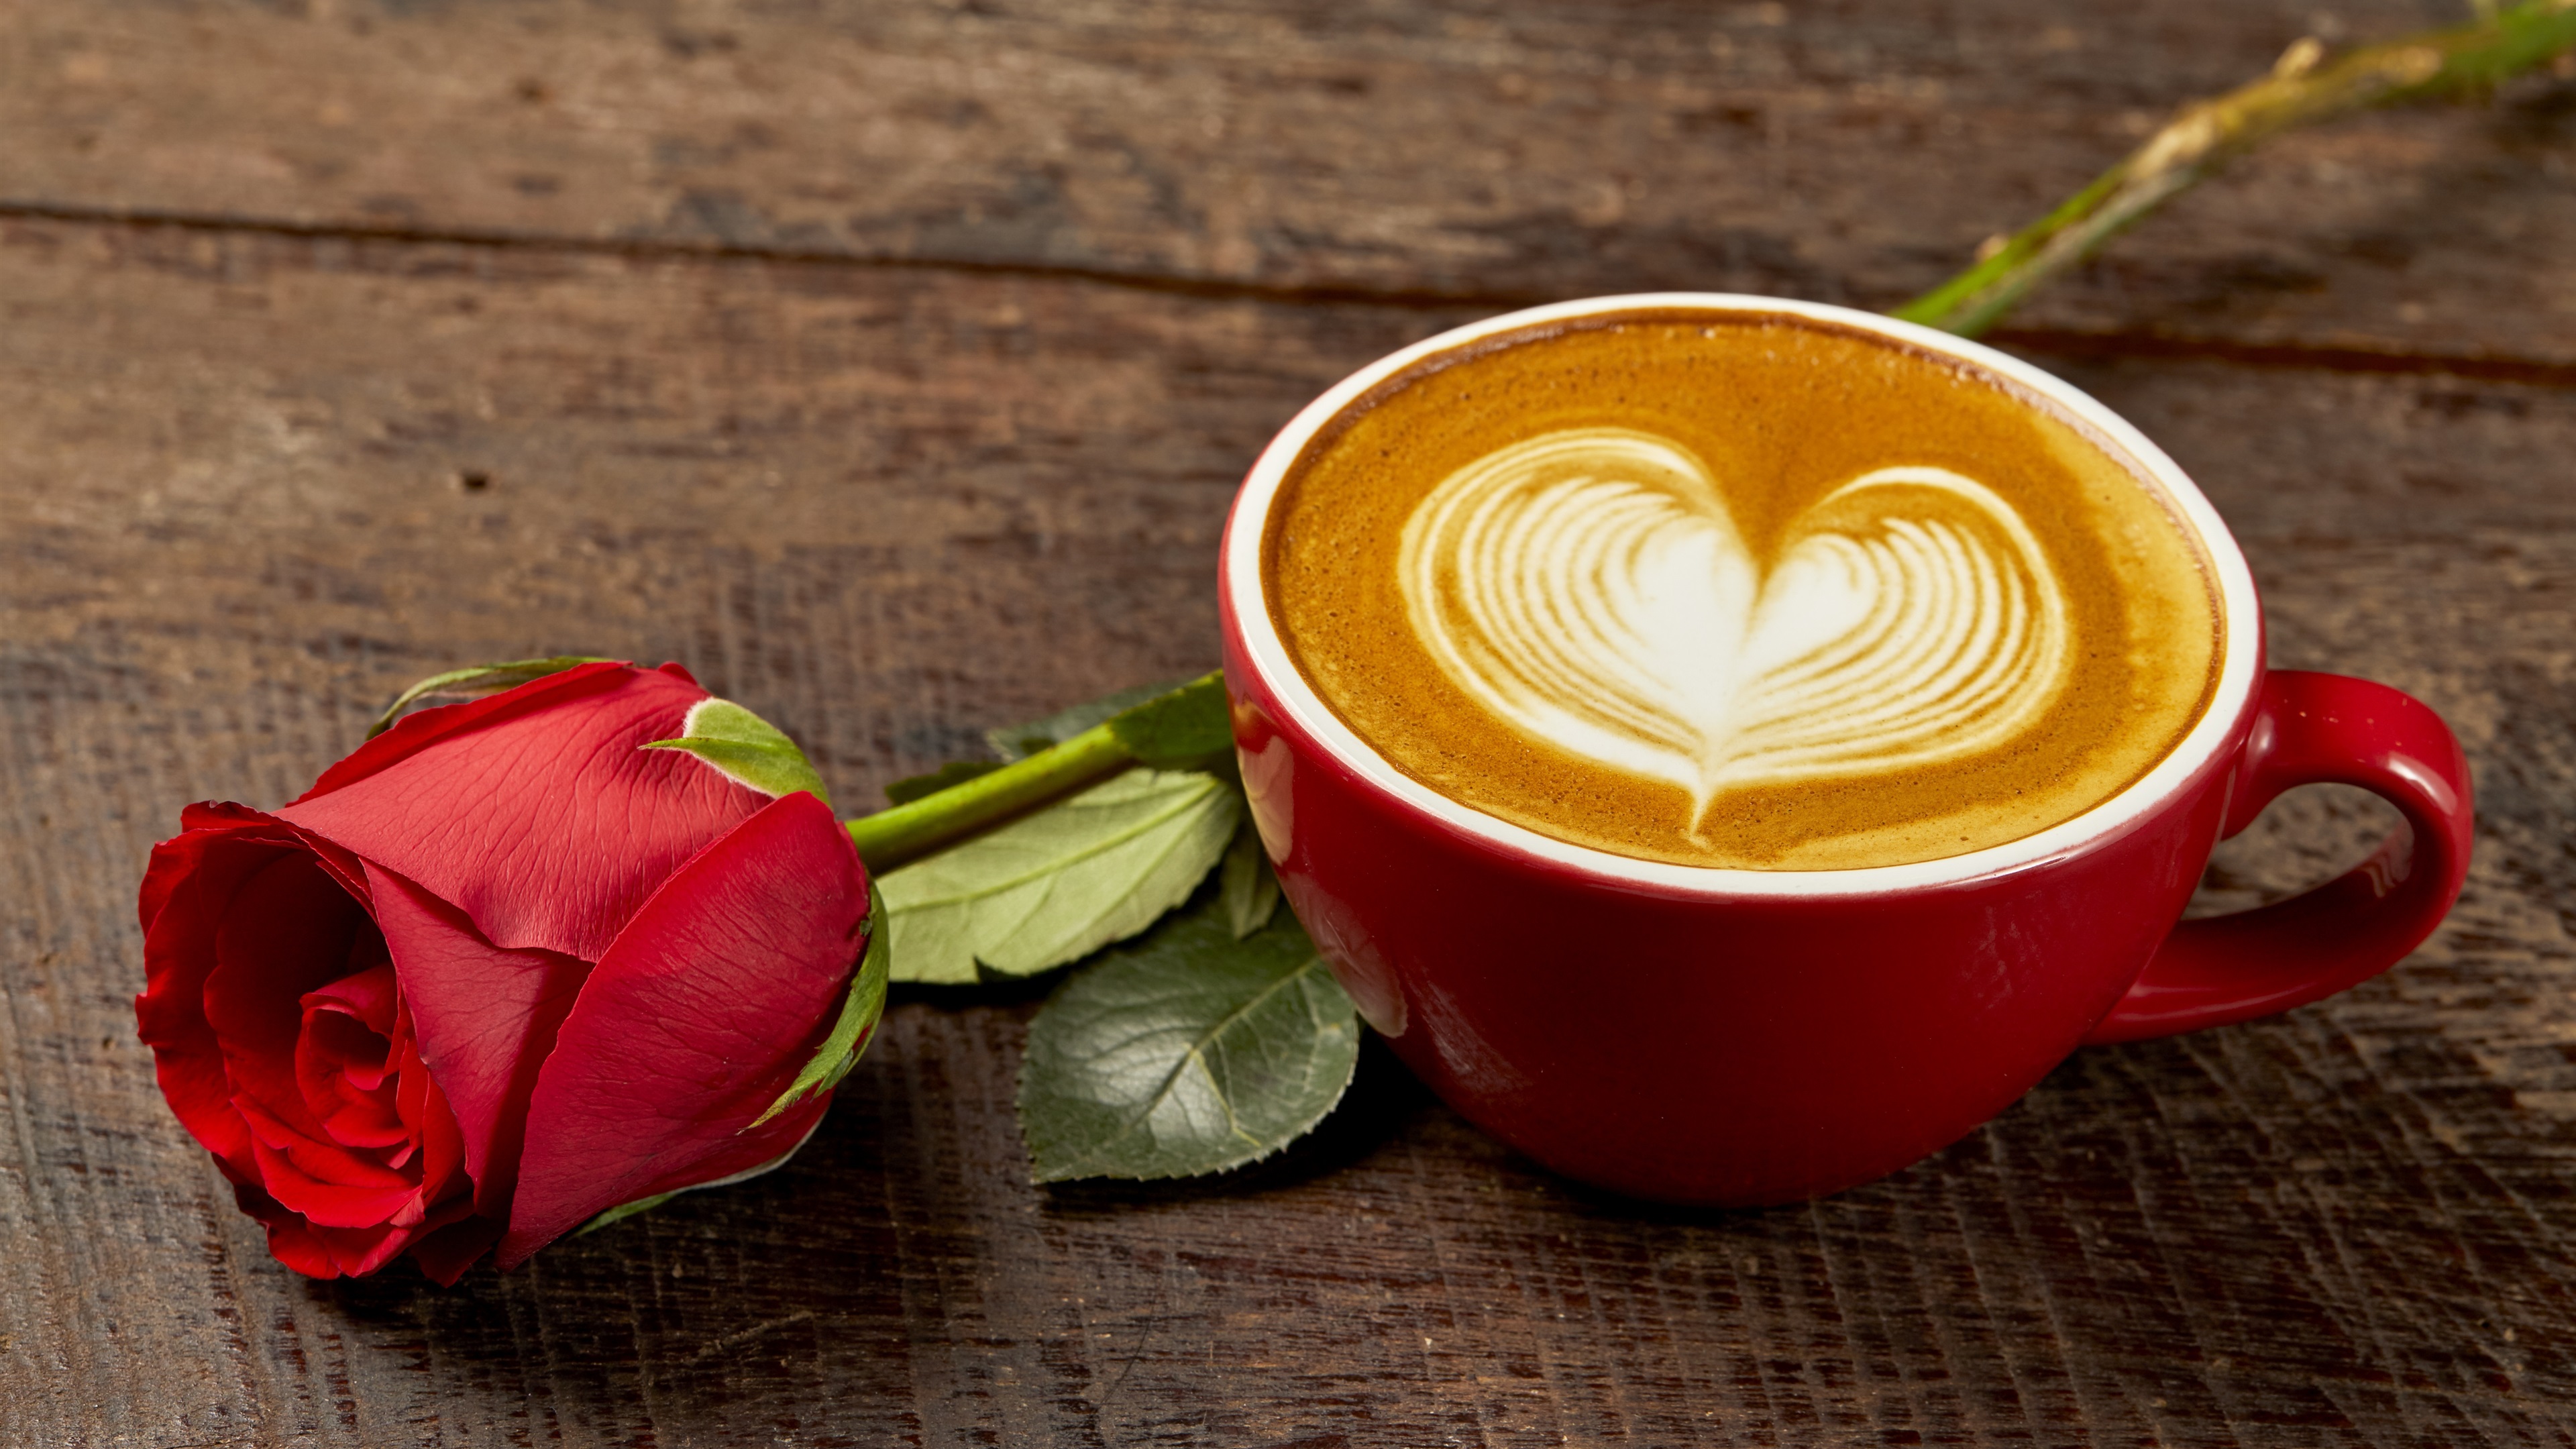 Red Rose Cup With Coffee Love Heart Romantic Wallpaper Hd